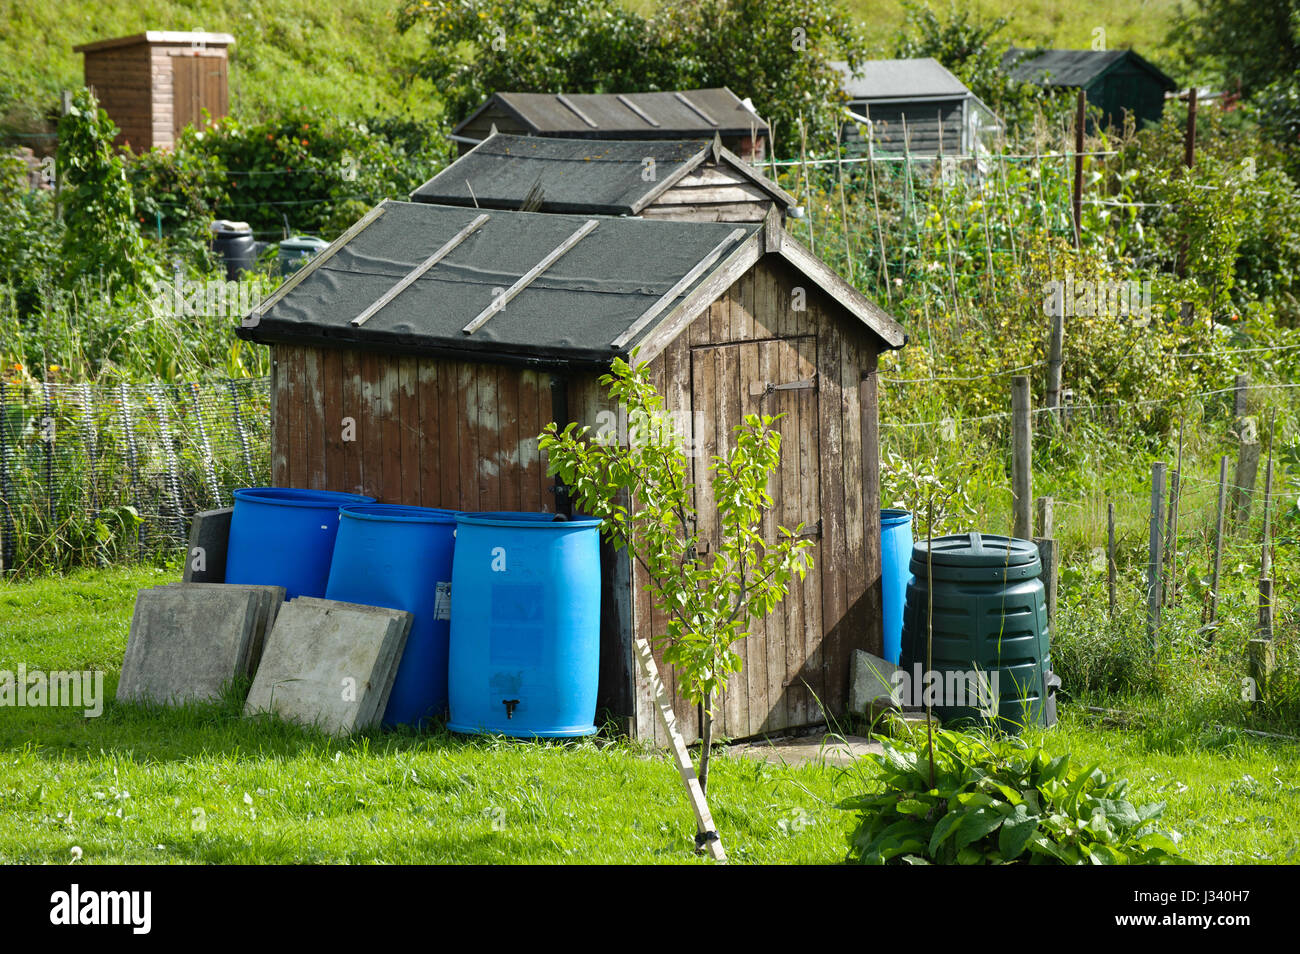 Sheds and greenhouses on allotments at Settle, North Yorkshire. Collecting rain water for watering gardens. Stock Photo